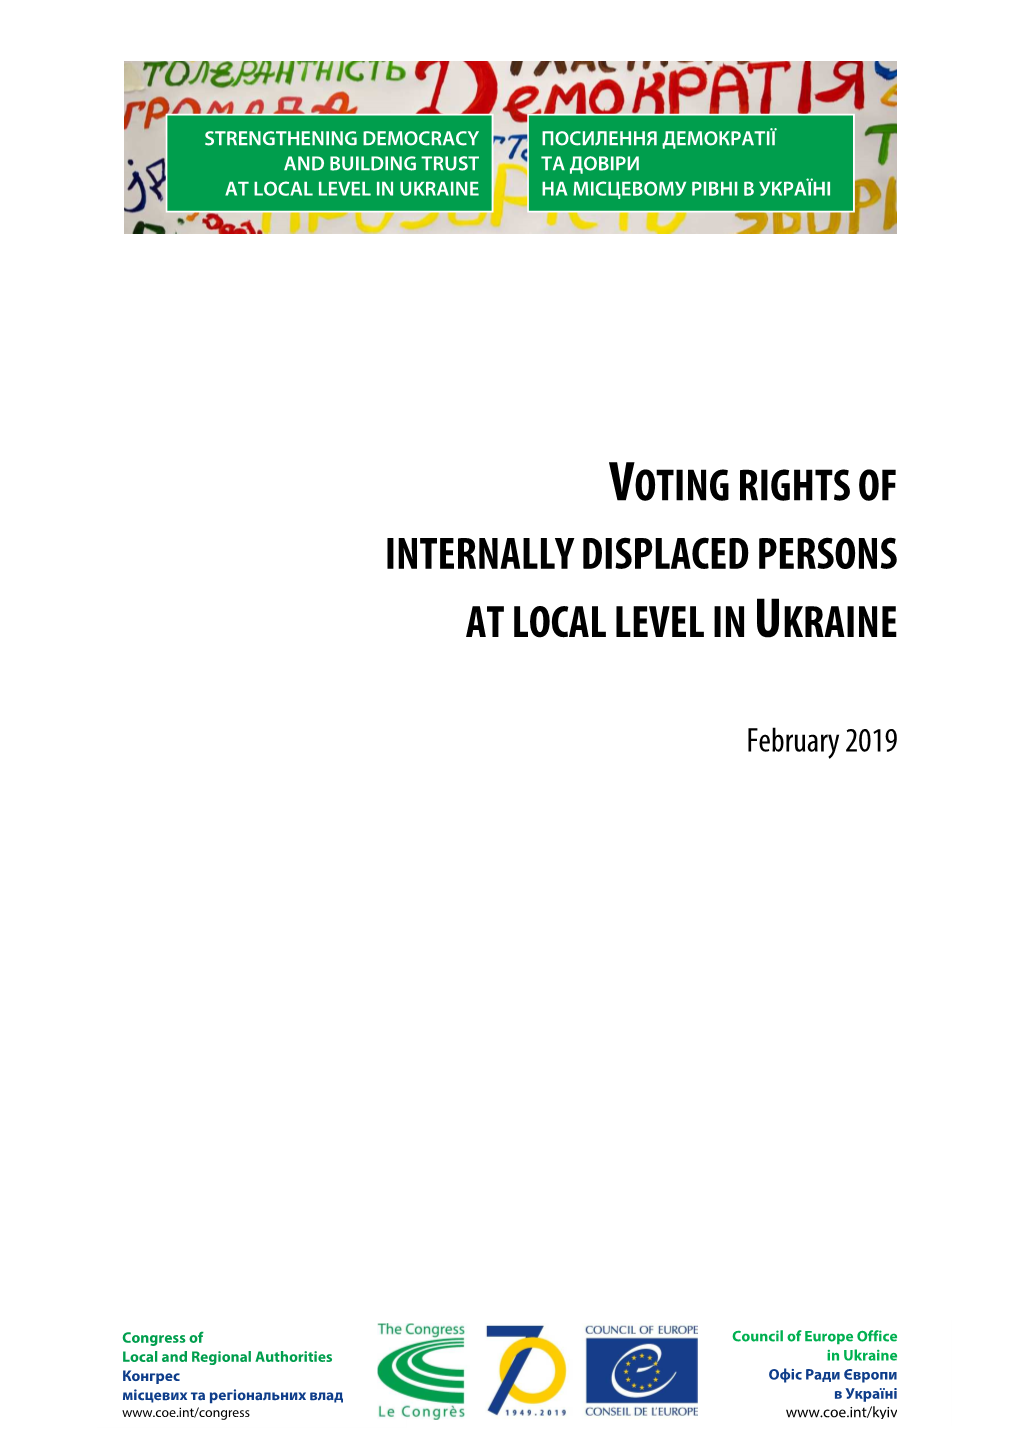 2019-02-14 Voting Rights of Idps at Local Level in Ukraine FINAL